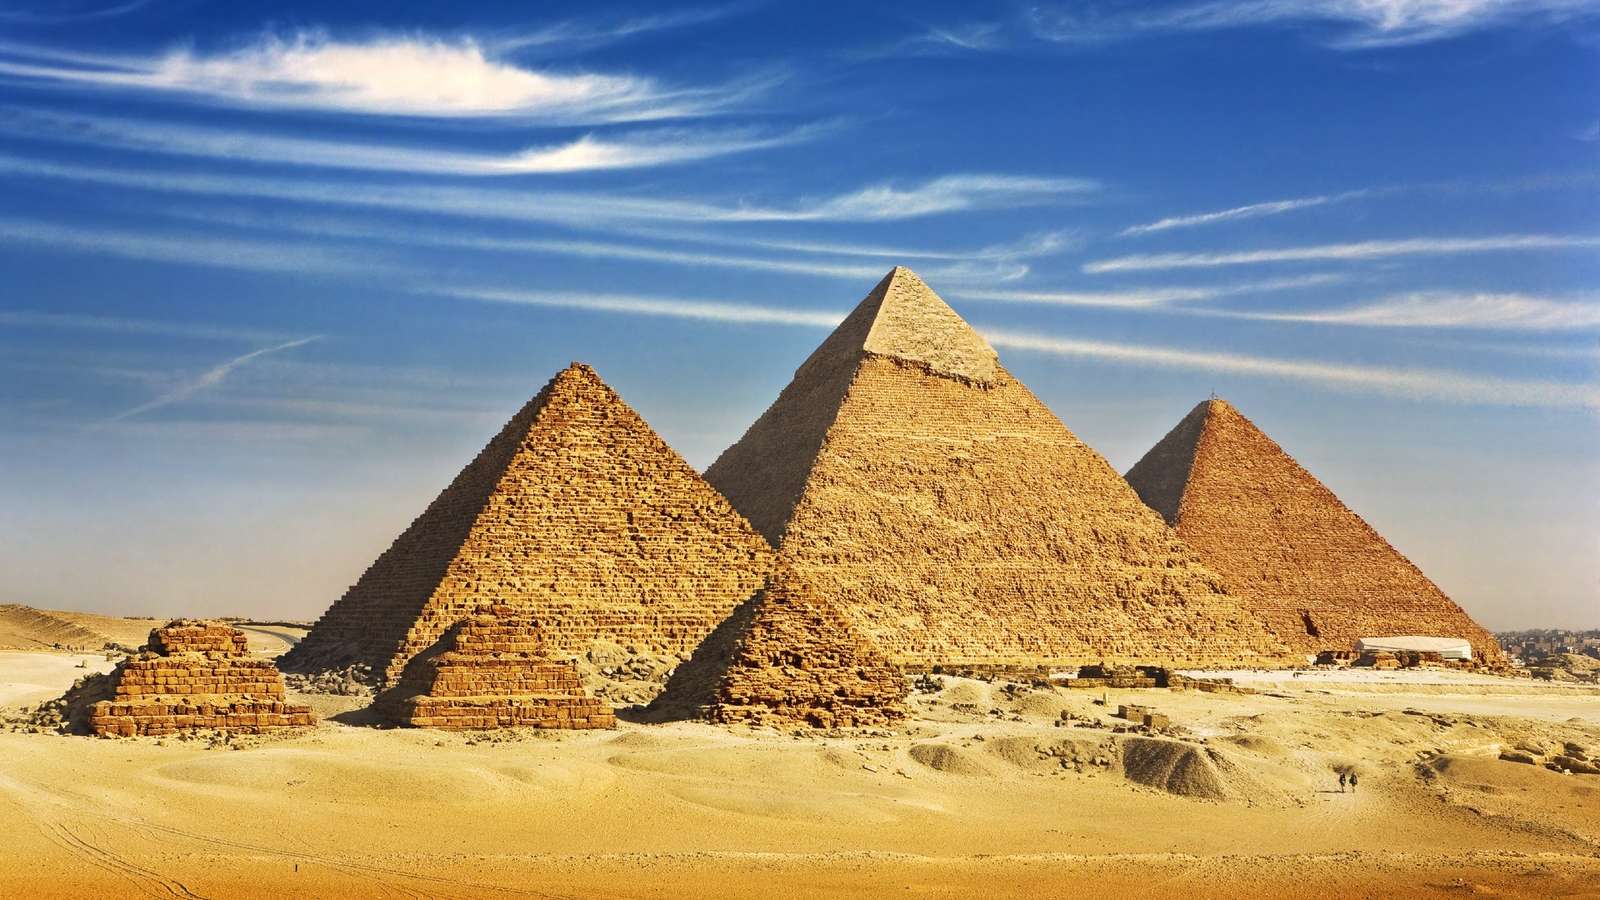 Africa - Pyramids puzzle online from photo